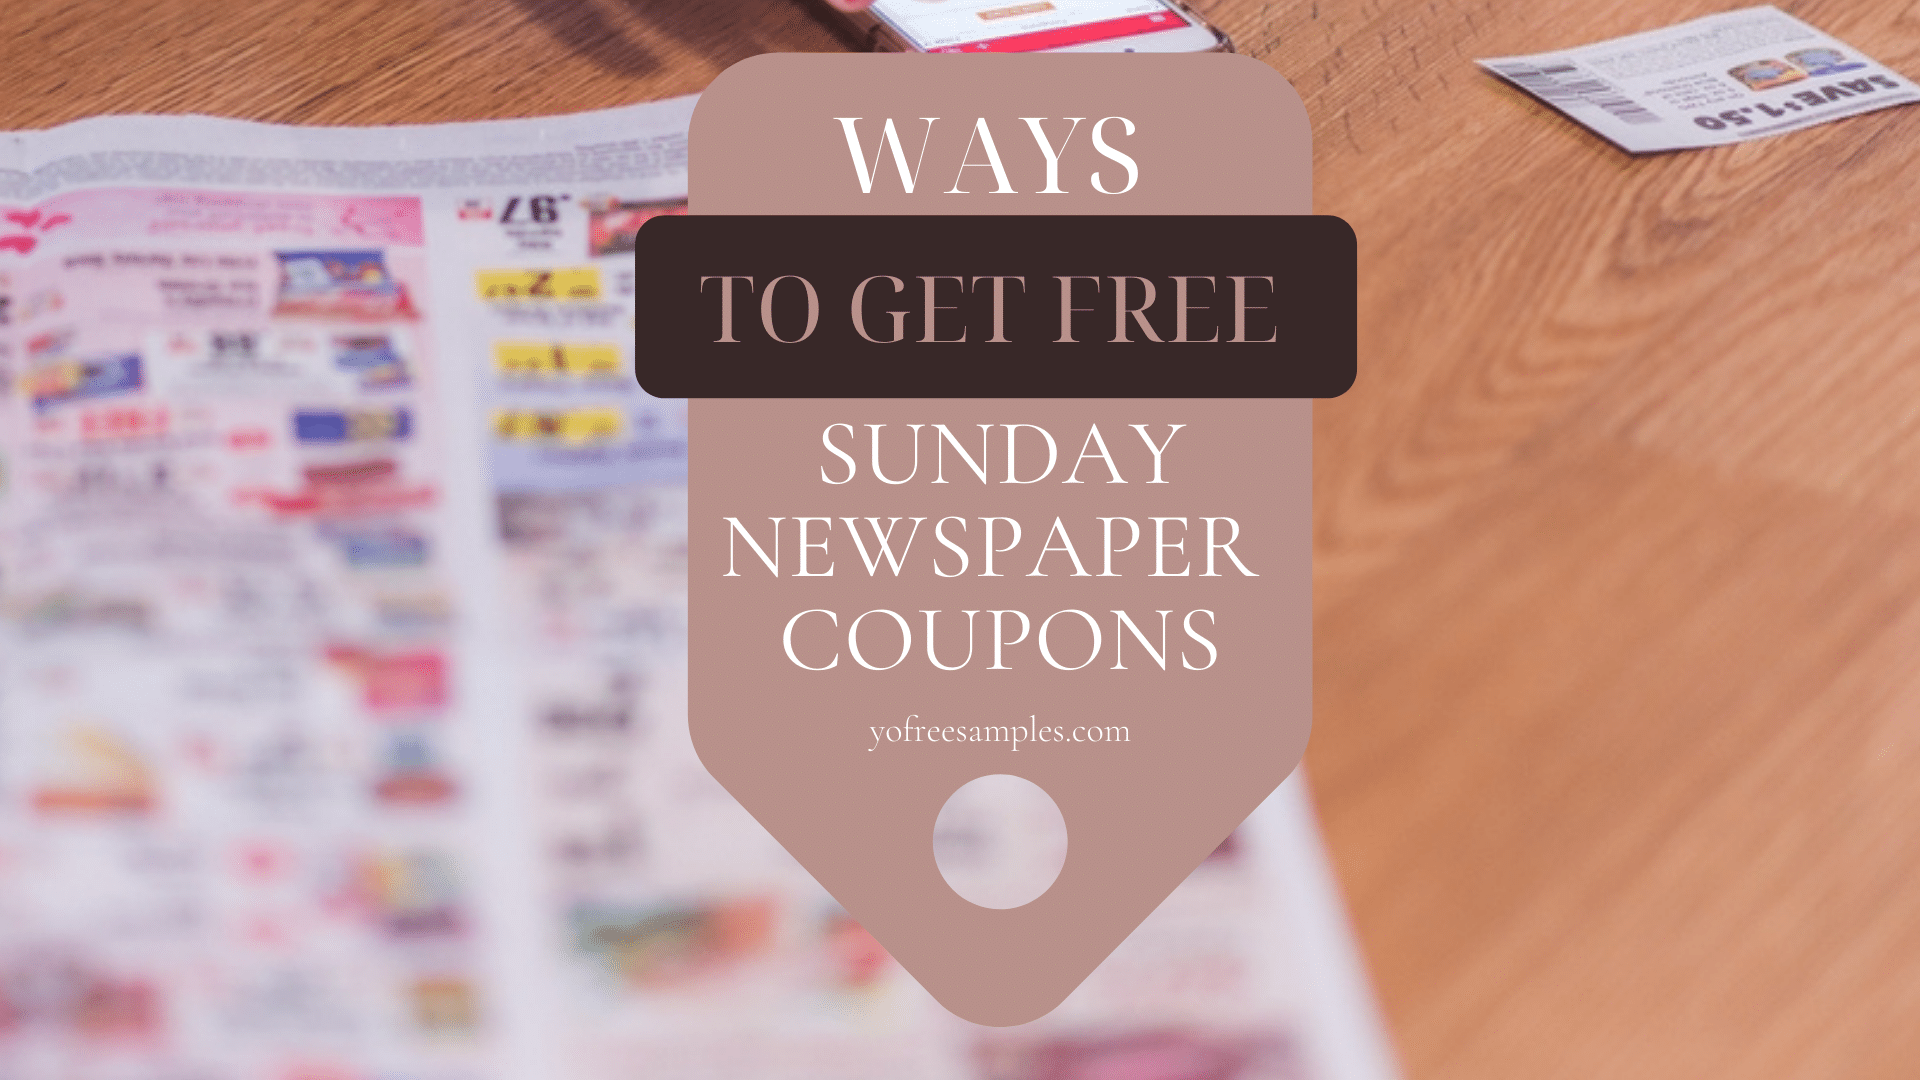 19 Best Ways to Get Free Sunday Newspaper Coupons